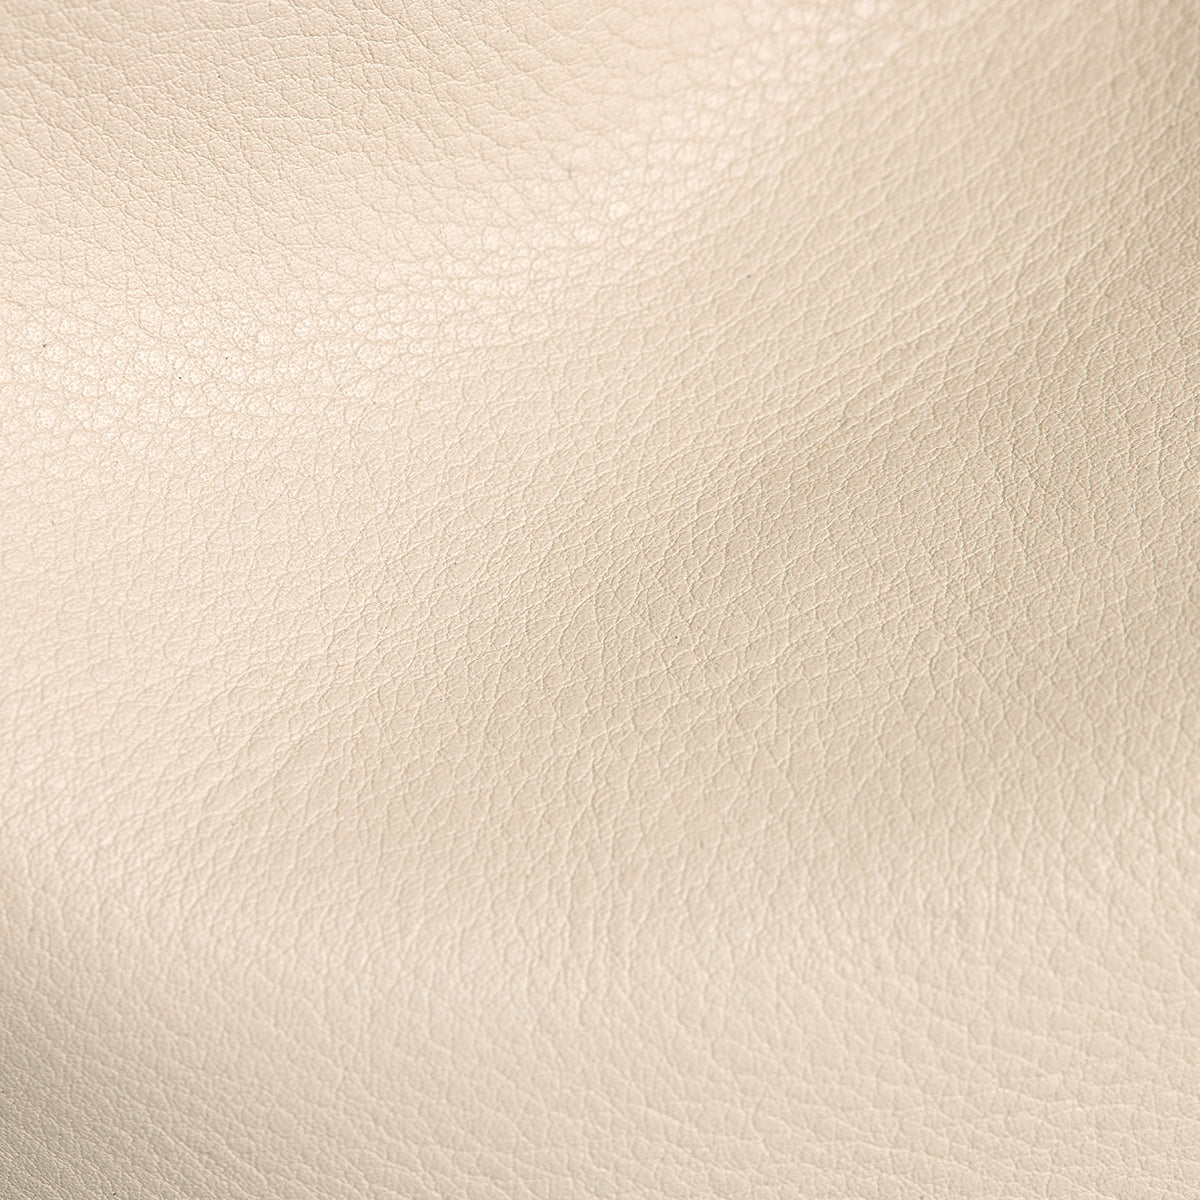 Daniel-Med-Chateau-Cream-Leather-Swatch